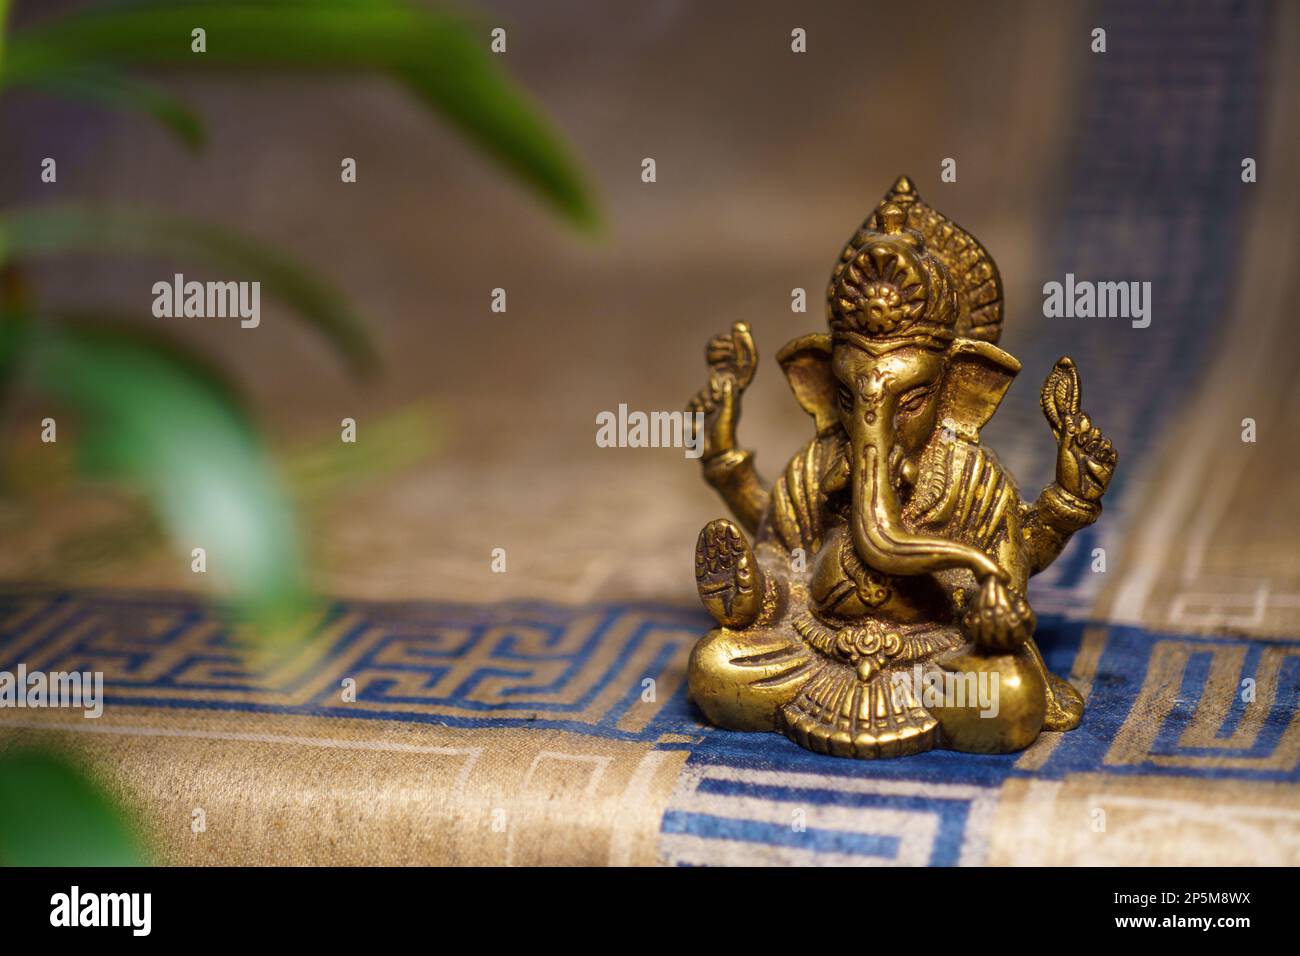 Bronze ganesha statue on a golden rug with a green plant in the foreground Stock Photo